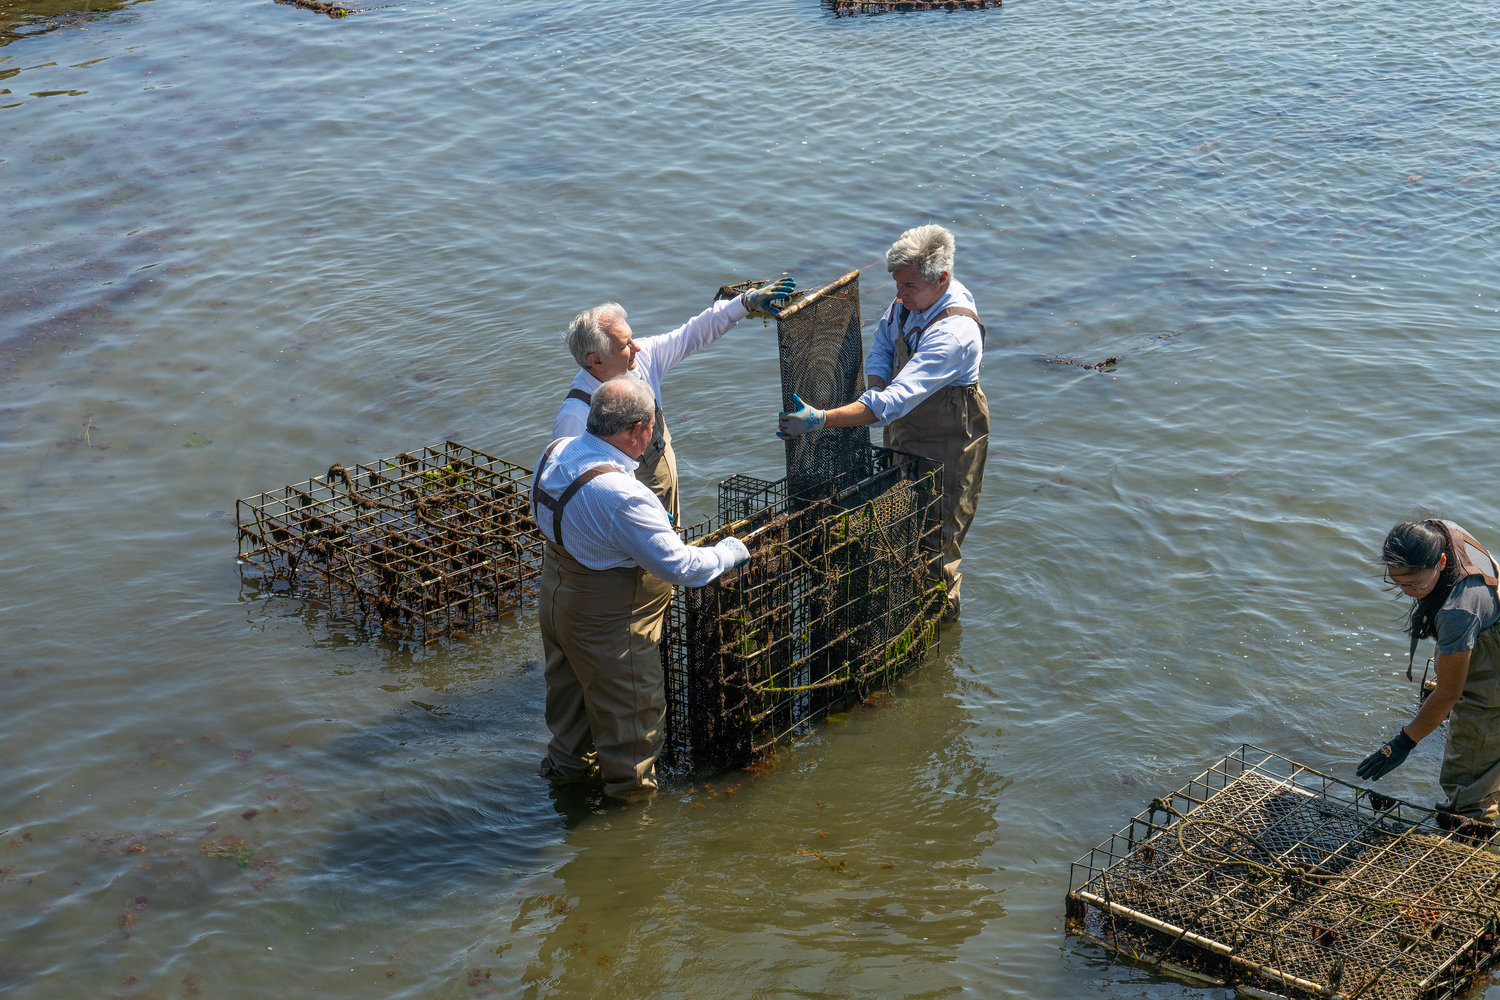 Roger Williams President Ioannis Miaoulis, Sen. Jack Reed and Sen. Sheldon Whitehouse (left to right) look through the cages of maturing oysters during a tour of the university’s oyster farm on Monday.